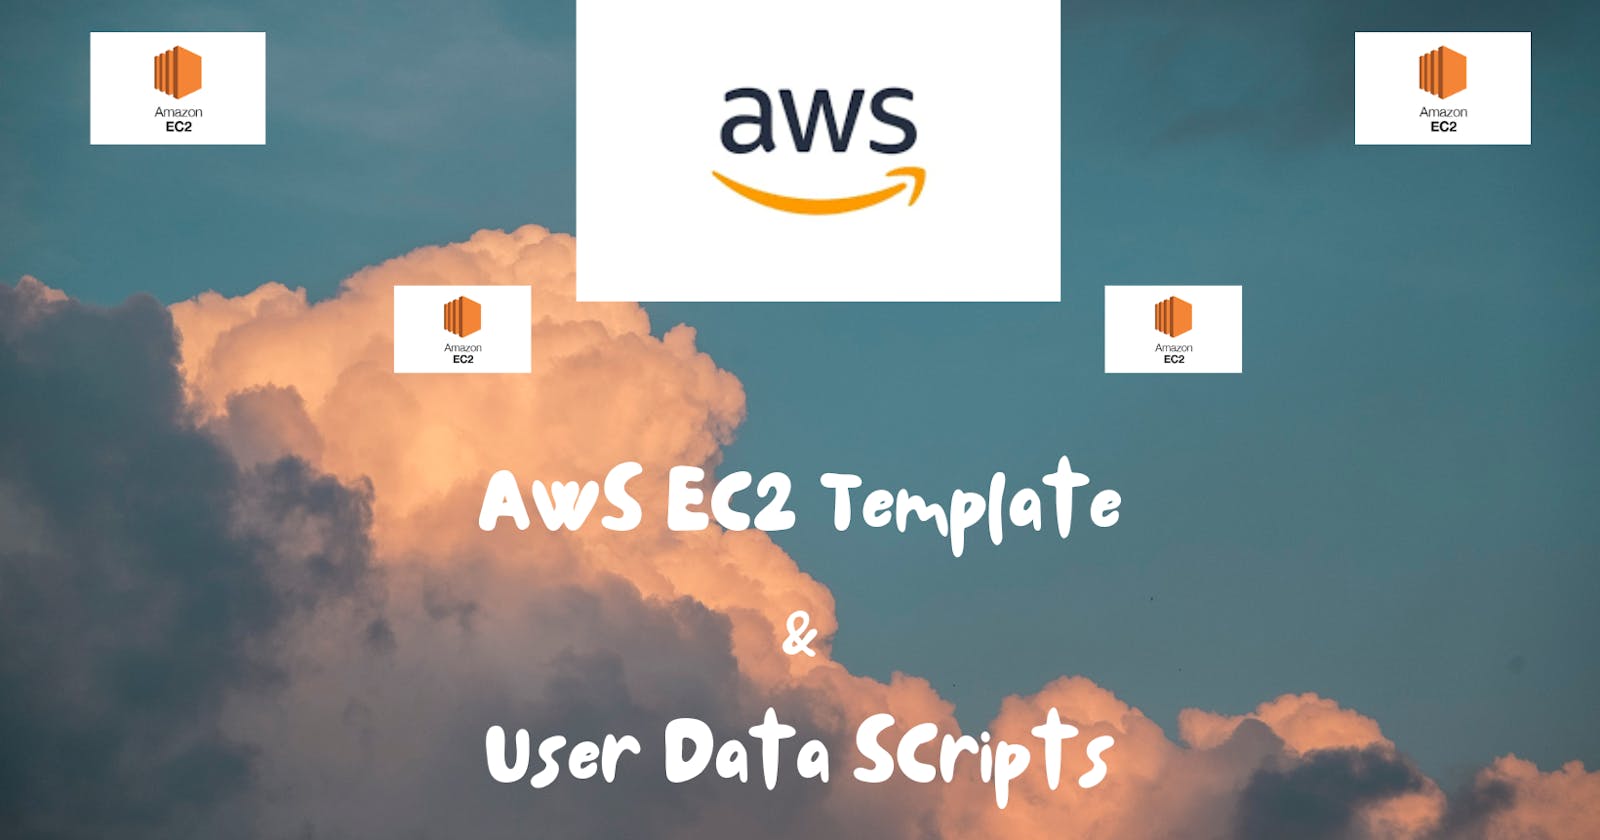 Simplified AWS EC2 Templates: Launch, Modify, and Deploy with Ease